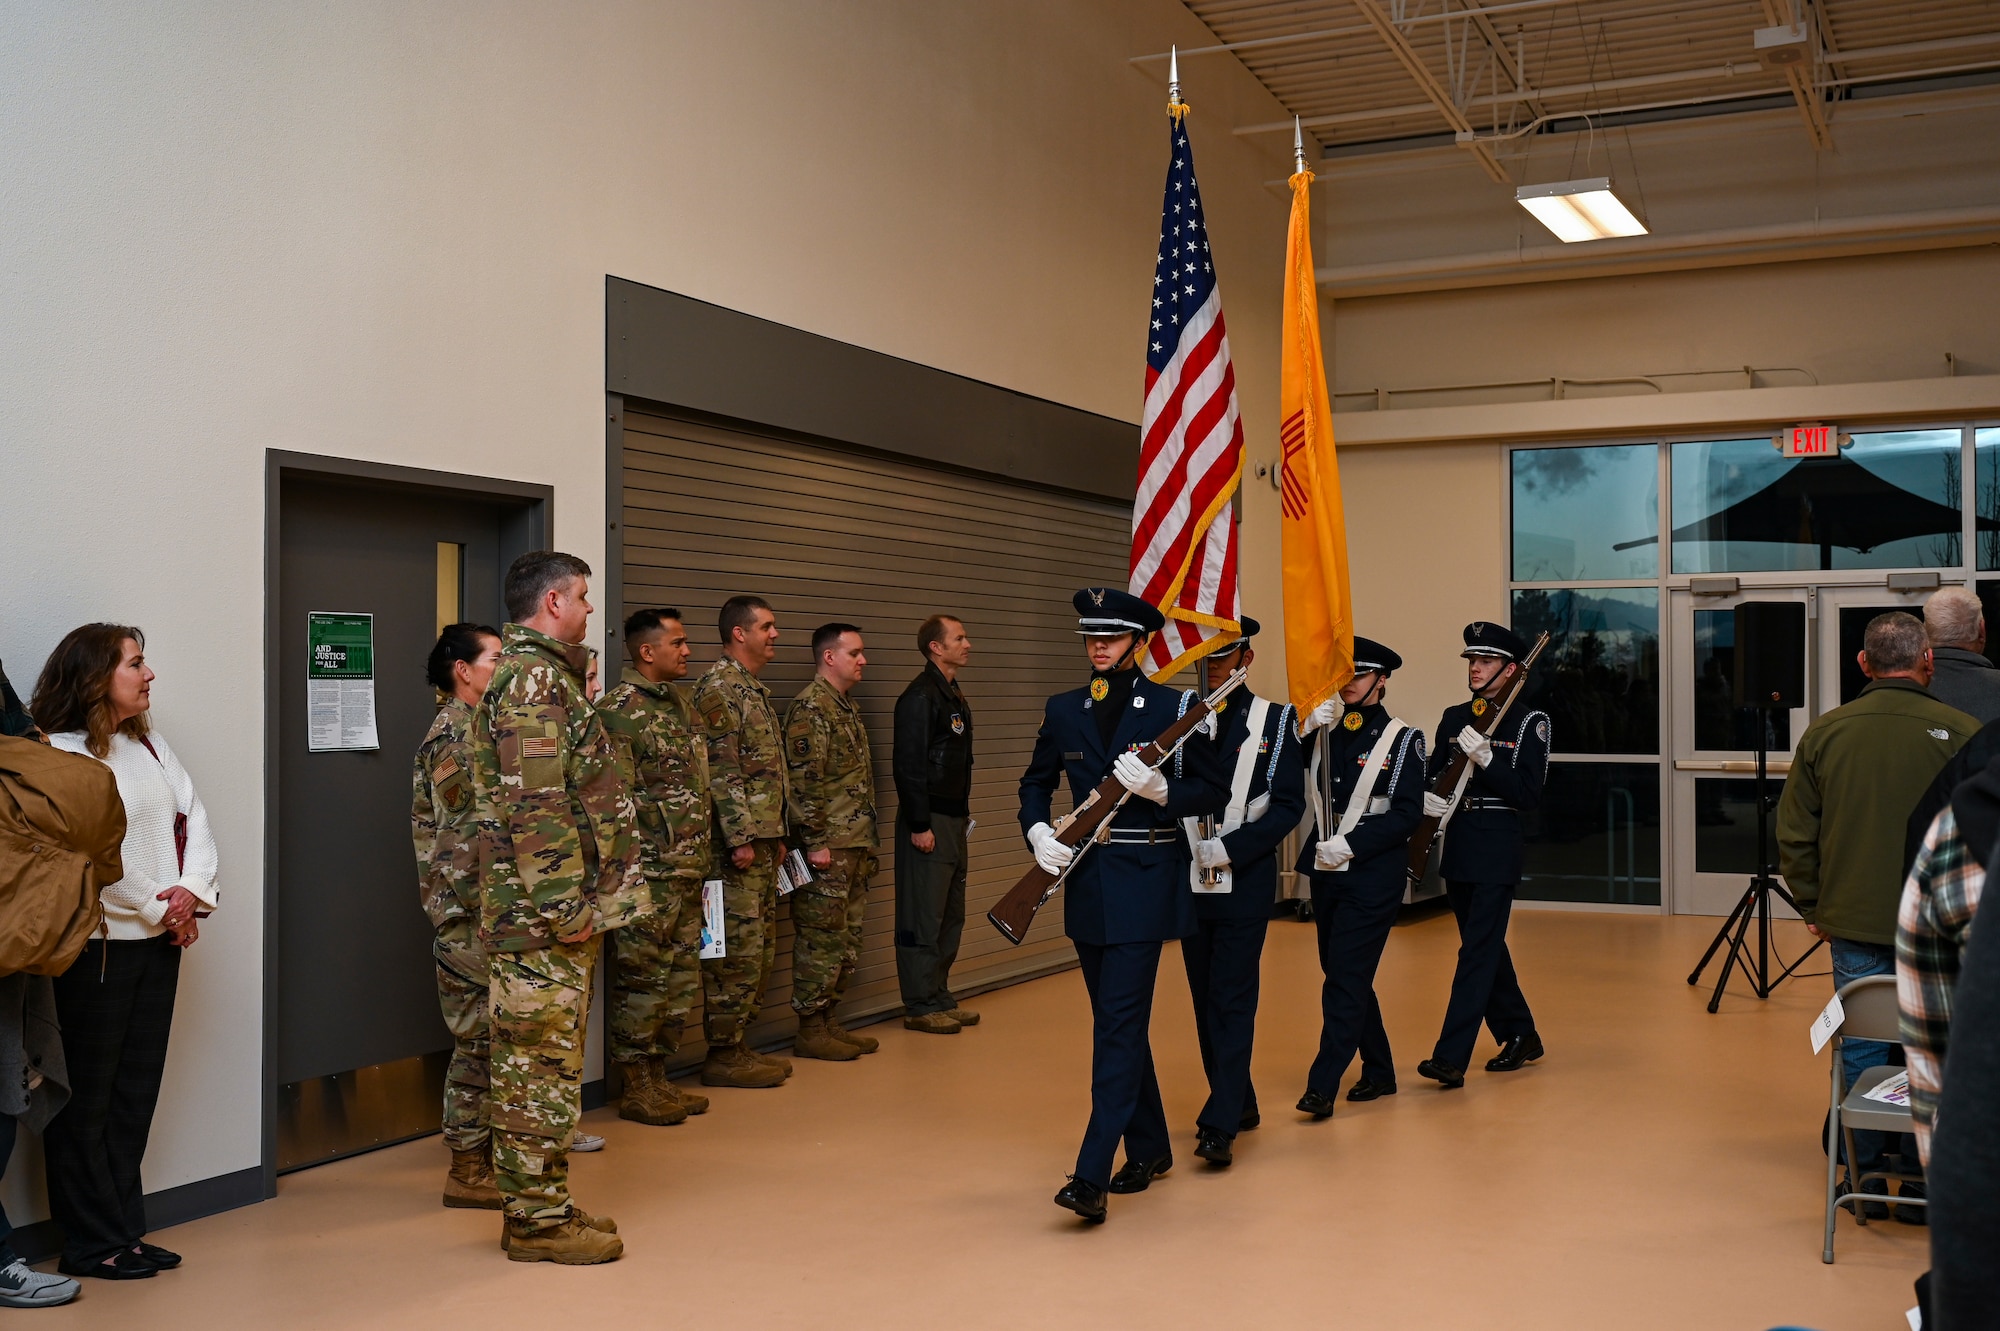 Members of the Air Force JROTC program from Alamogordo High School, present the colors during the Holloman Elementary School Ribbon Cutting and Open House at Holloman Air Force Base, New Mexico, Jan. 17, 2023. The construction of the school began in February 2021 taking a total of 21 months to complete. (U.S. Air Force photo by Airman 1st Class Isaiah Pedrazzini)